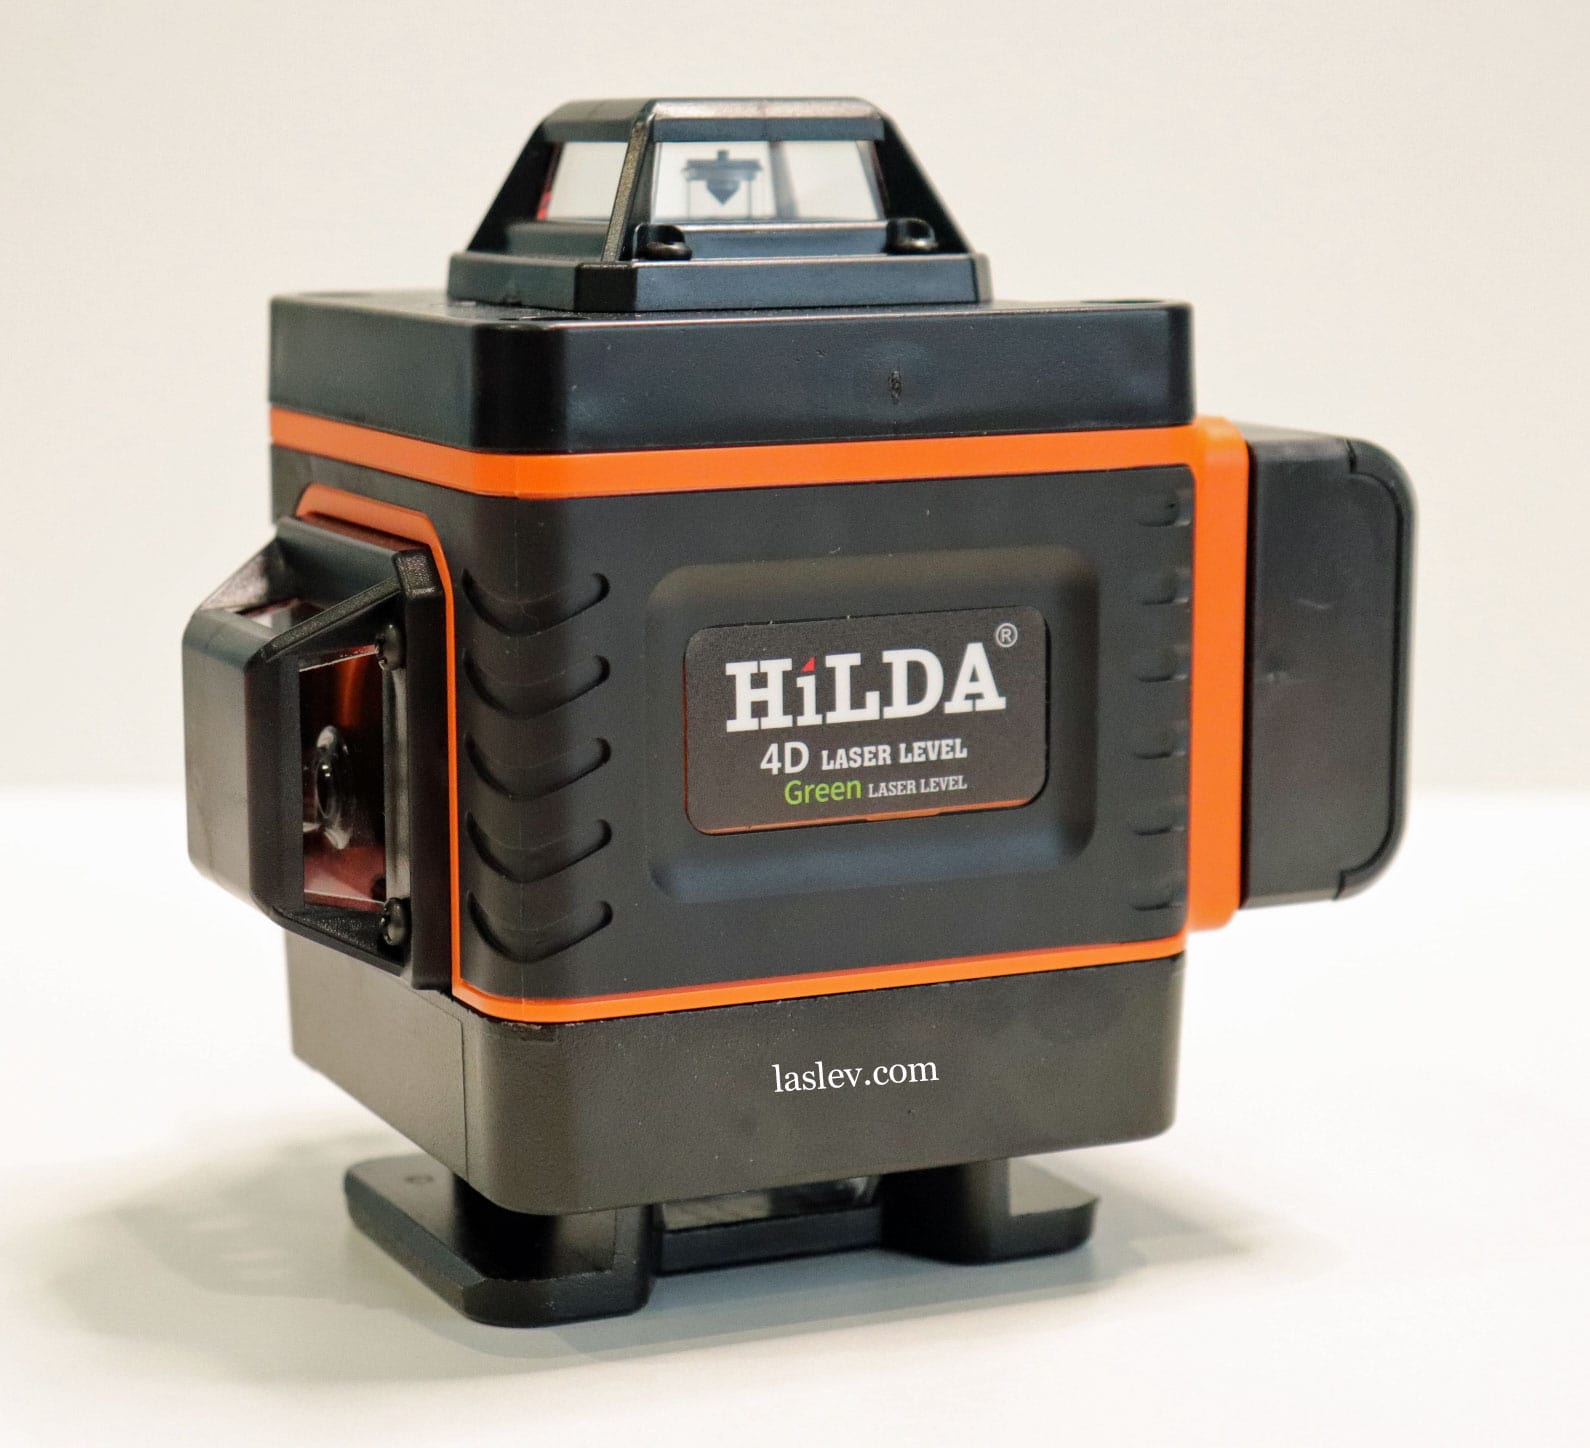 The appearance of the HILDA 4D green laser level with 16 lines or 4 planes of 360 degrees.